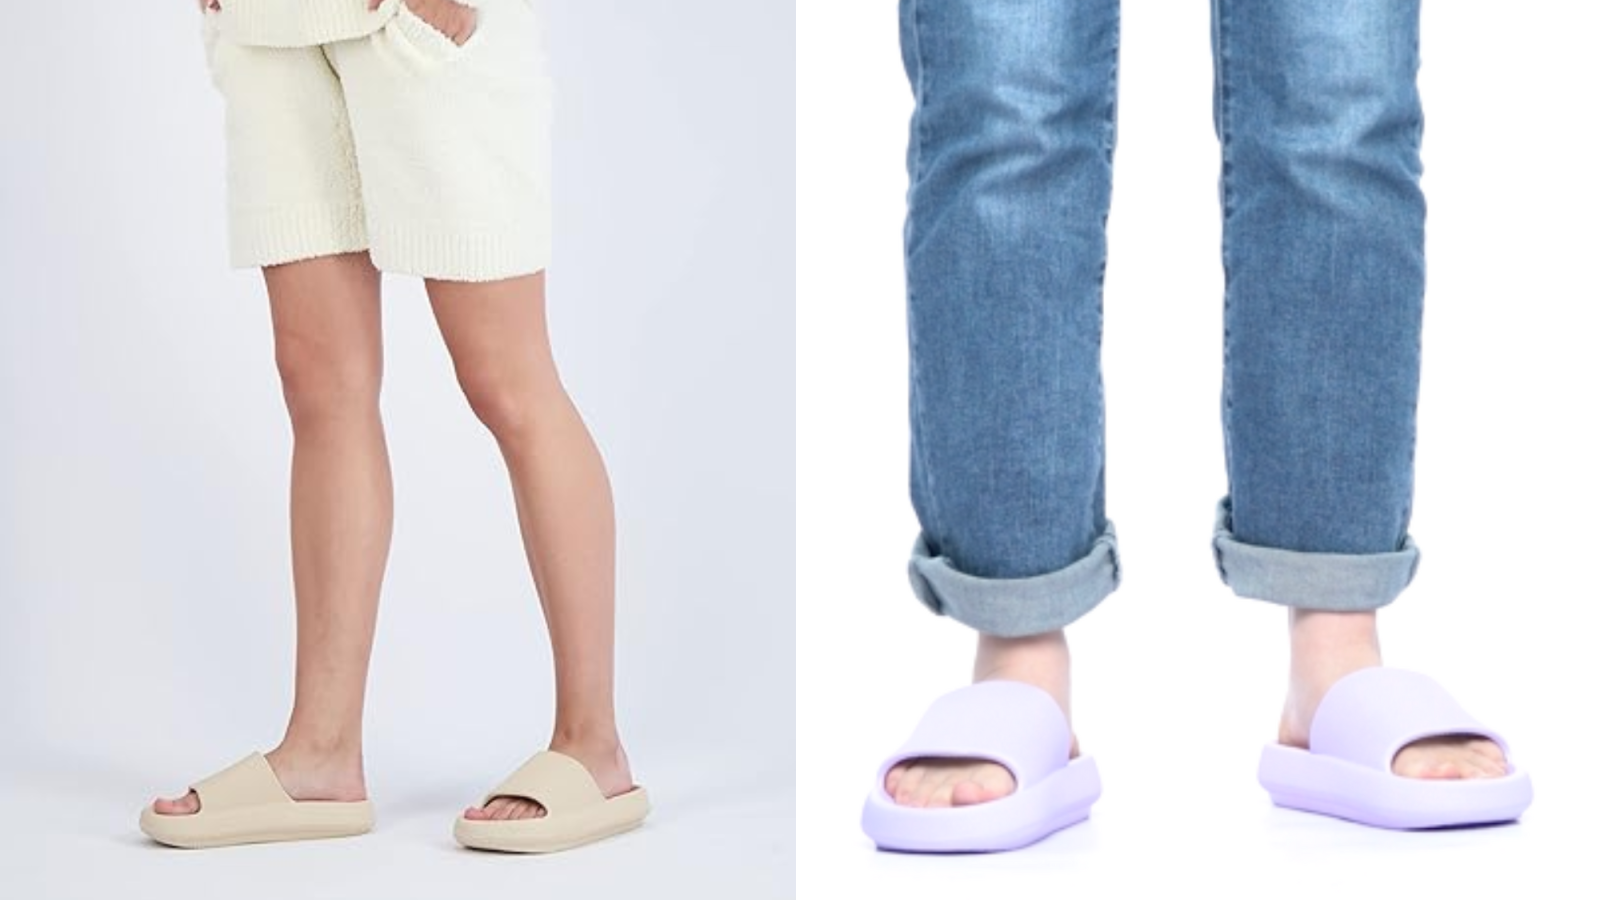 17 Cloud Slippers To Revitalize Drained, Aching Toes